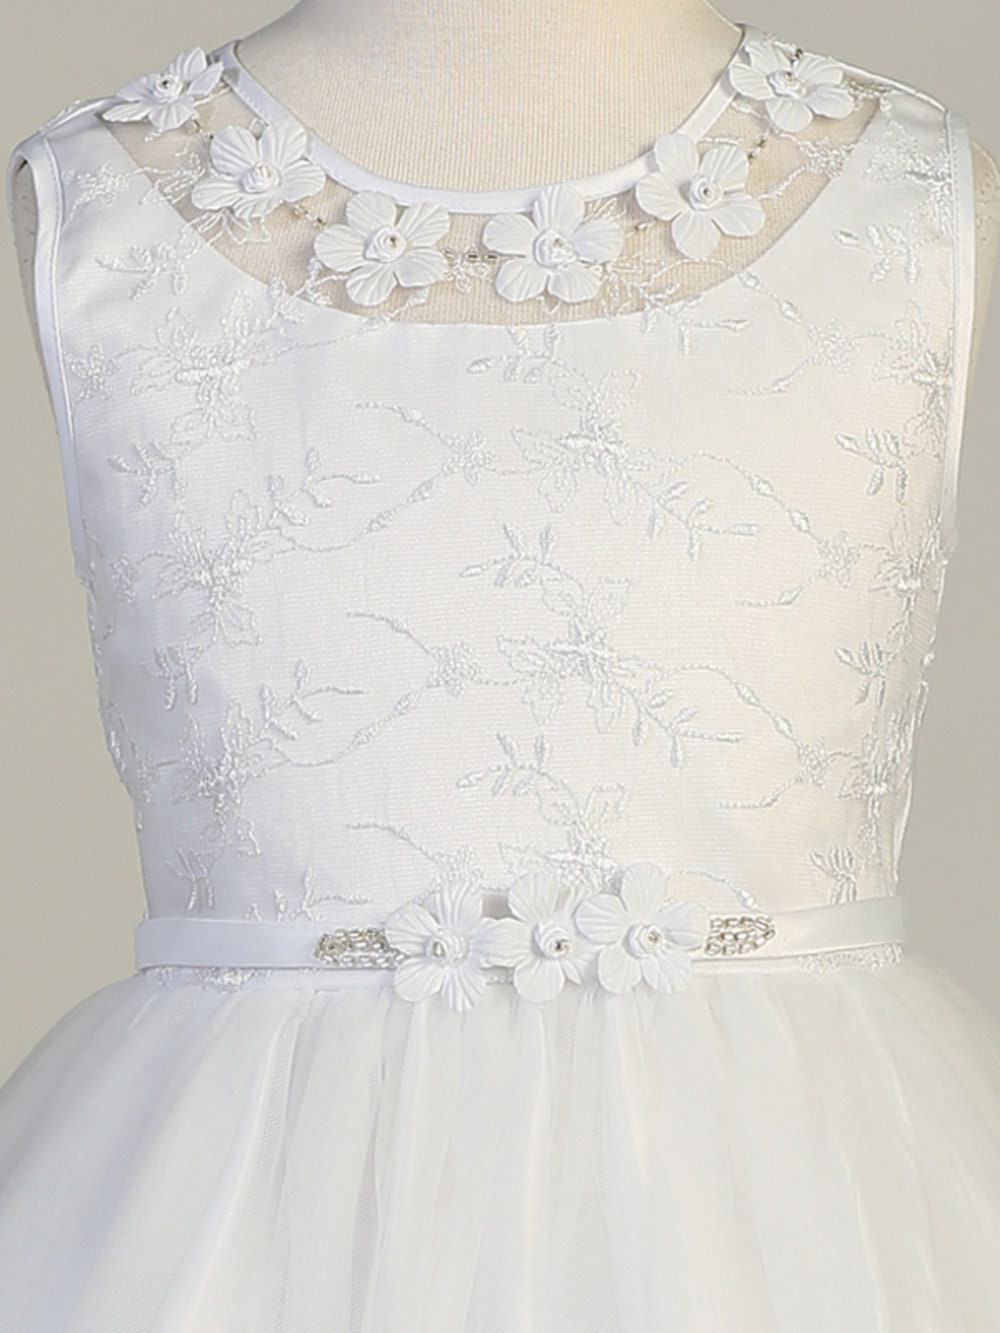 A view of the rhinestones and flower at the waist and the tulle skirt with embroidered edges.